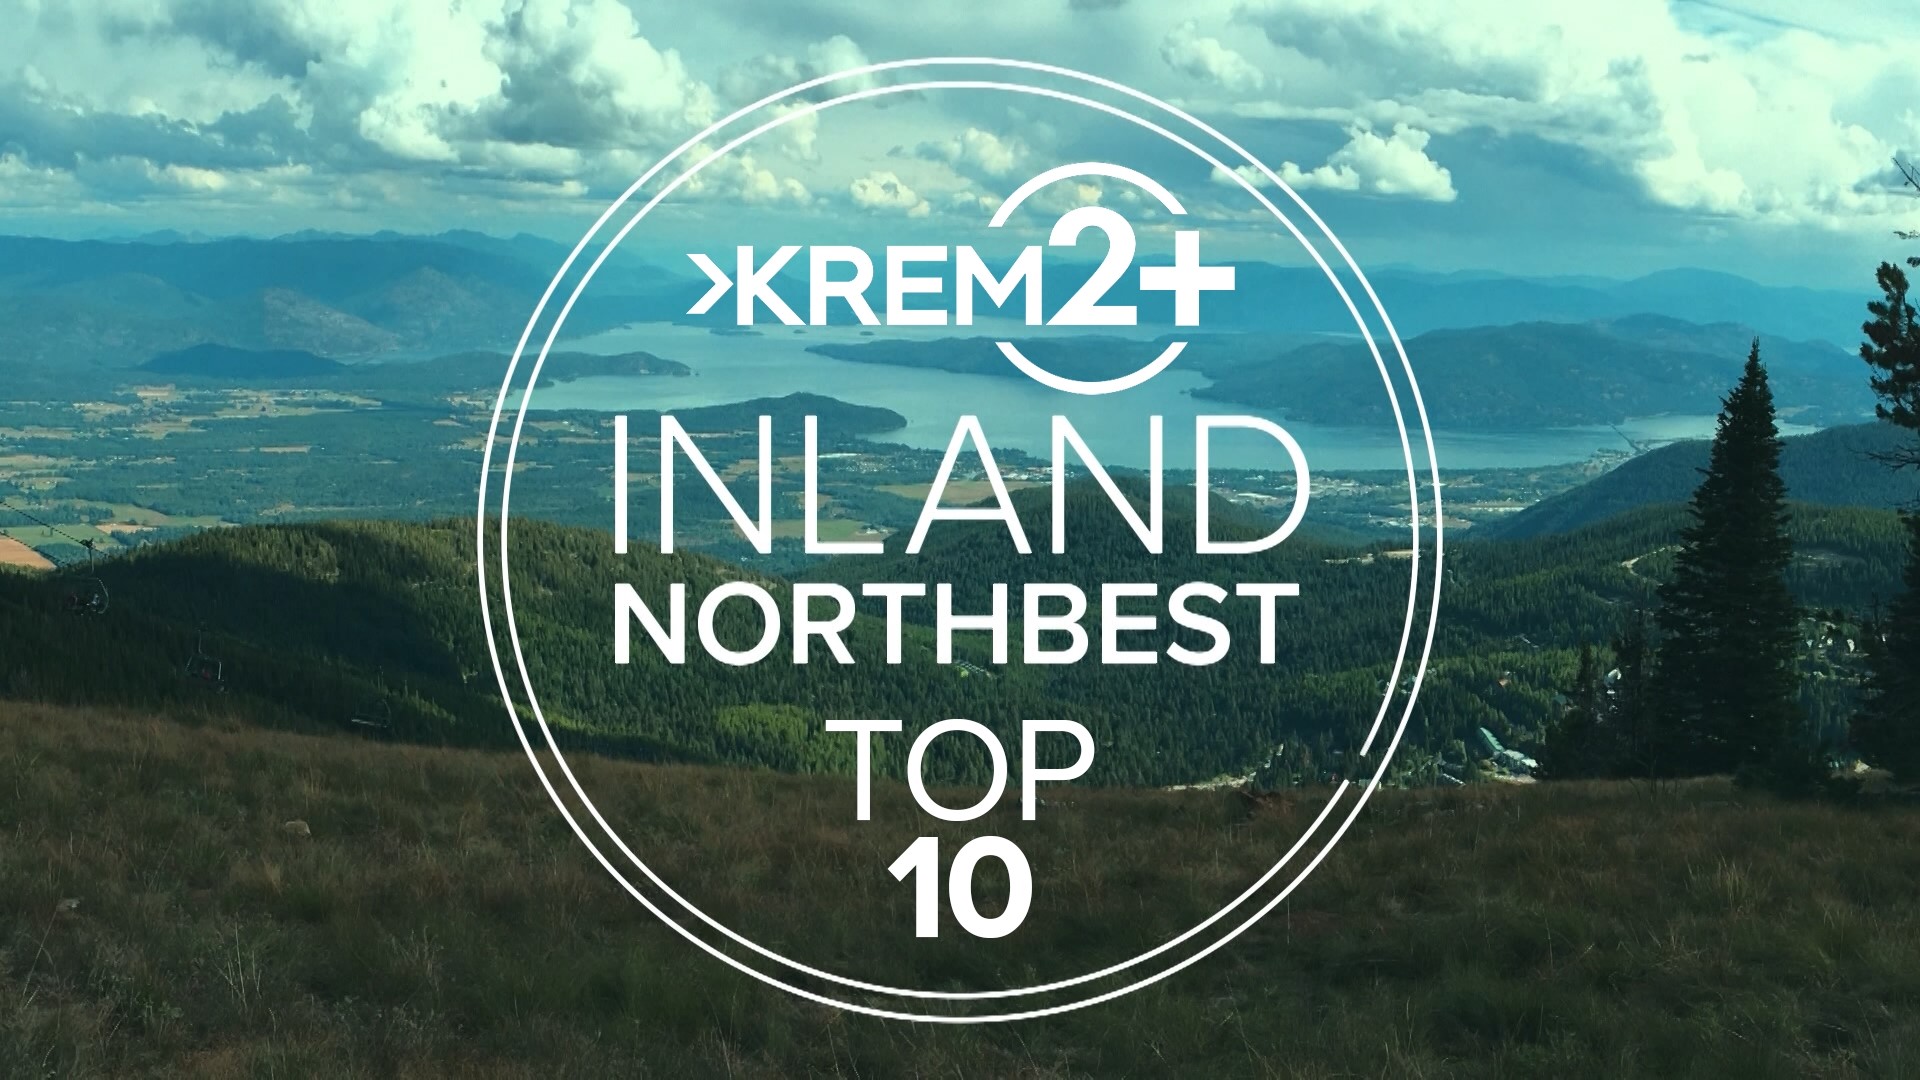 As we close out the year, we are excited to celebrate how great it is to live in the Inland Northwest. Join us as we count down the top Inland Northbest stories.